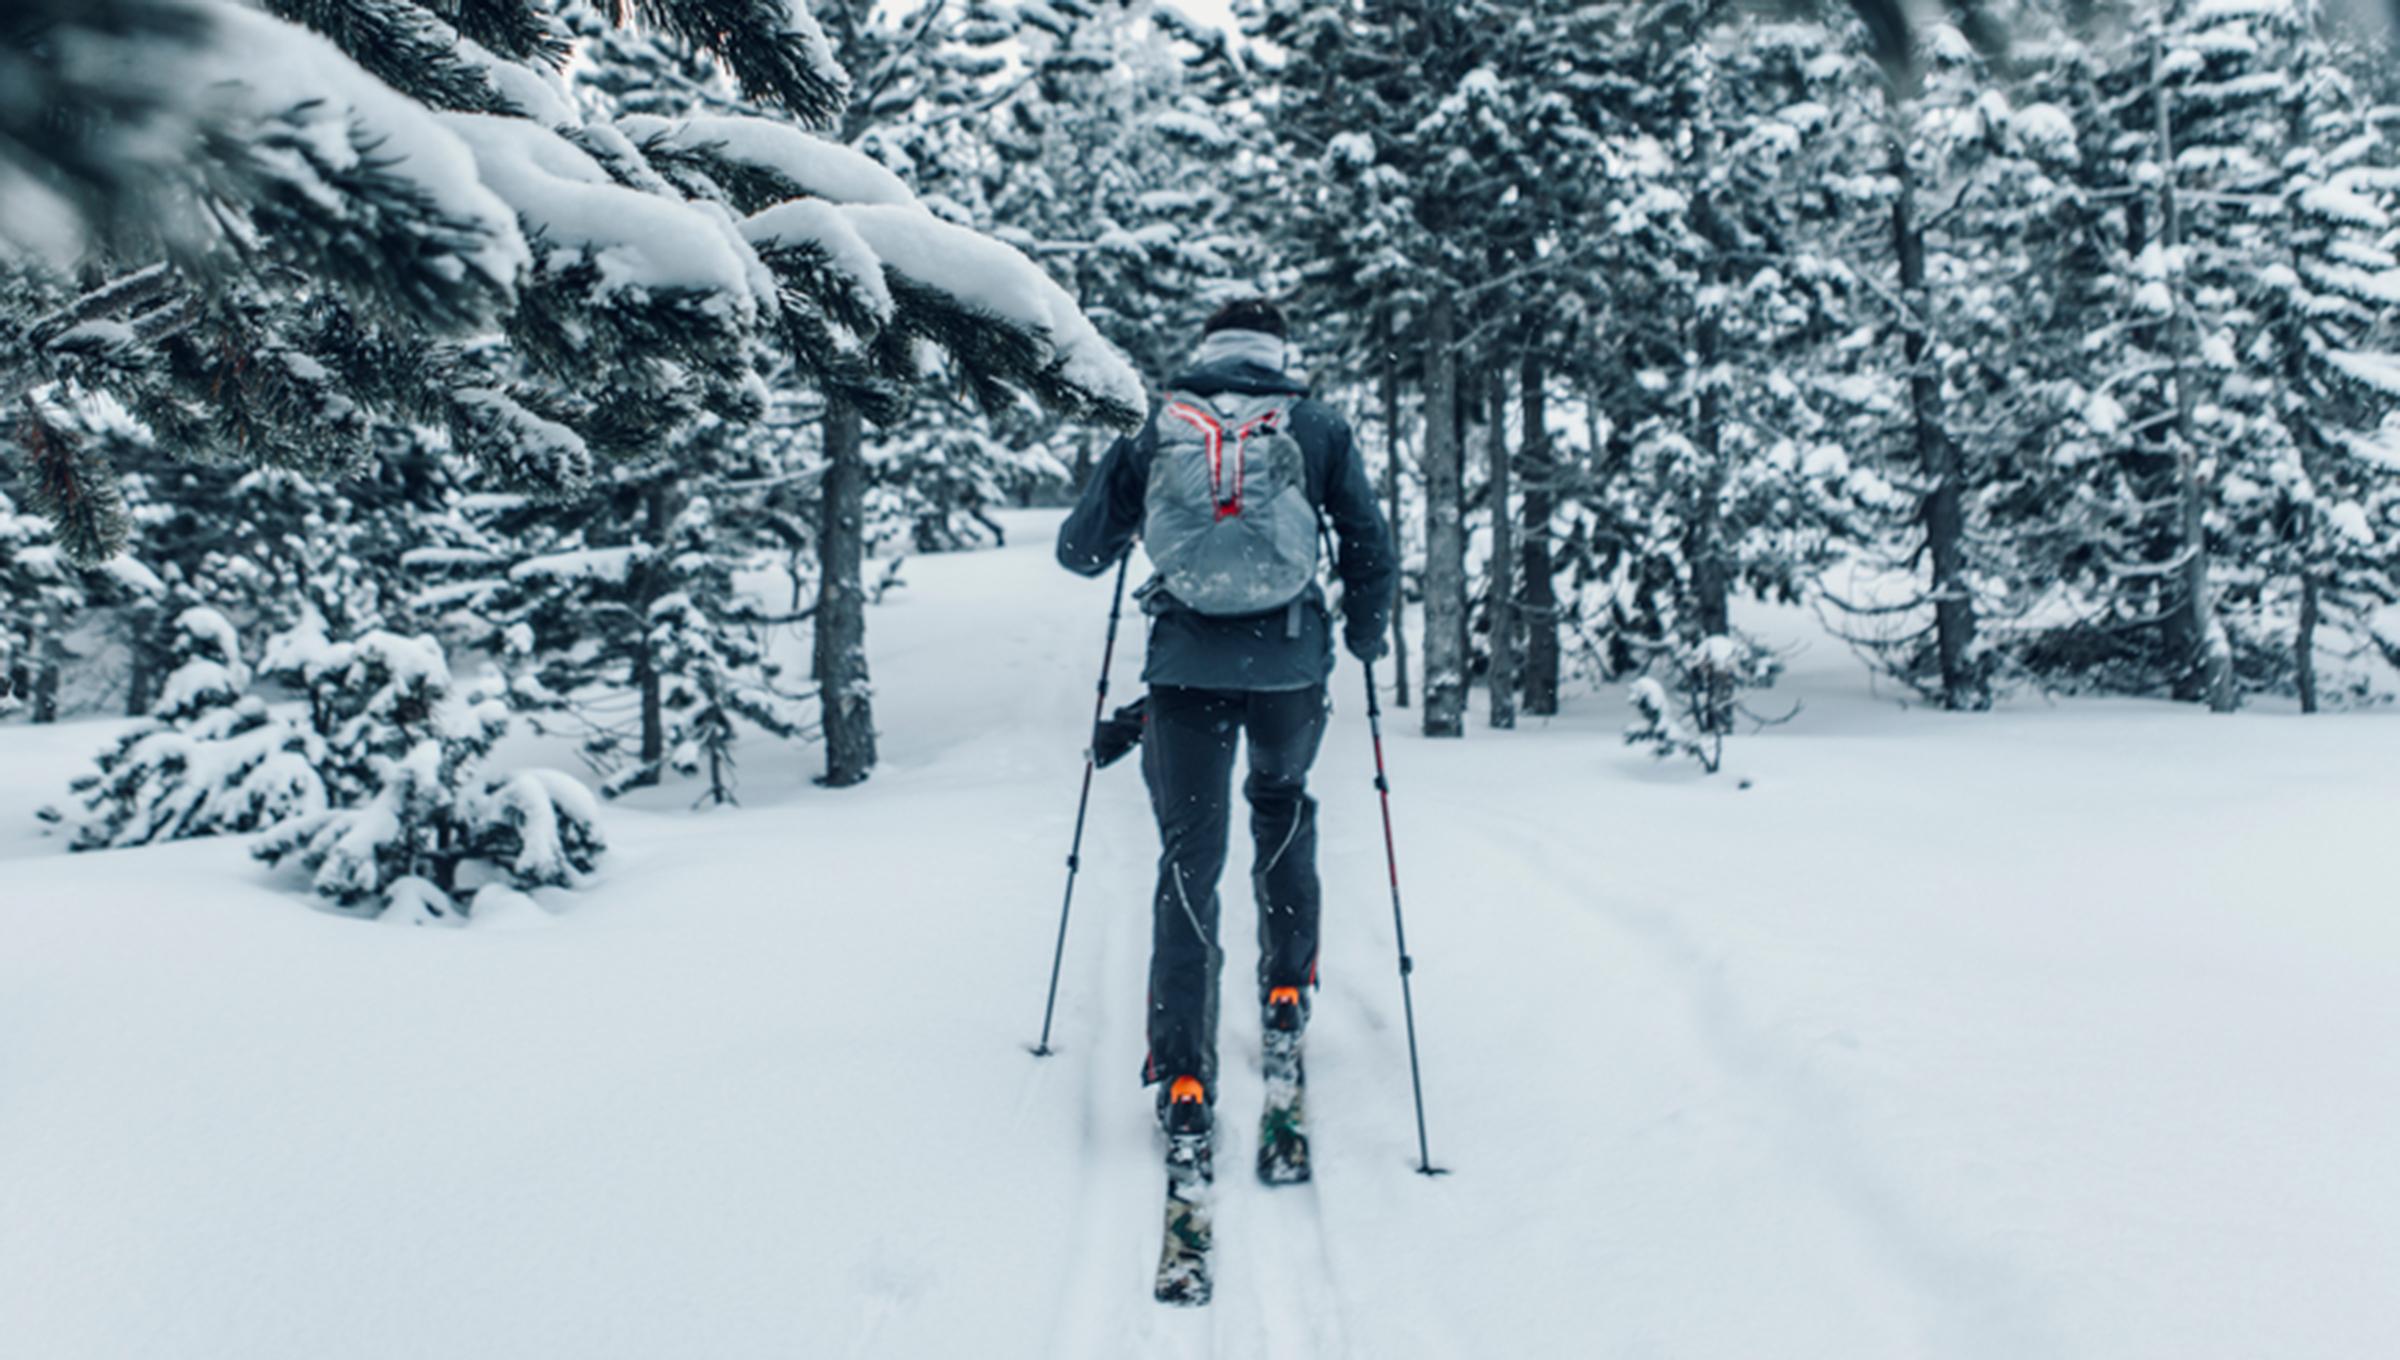 The Beginner’s Guide to Cross-Country Skiing | Right as Rain by UW Medicine